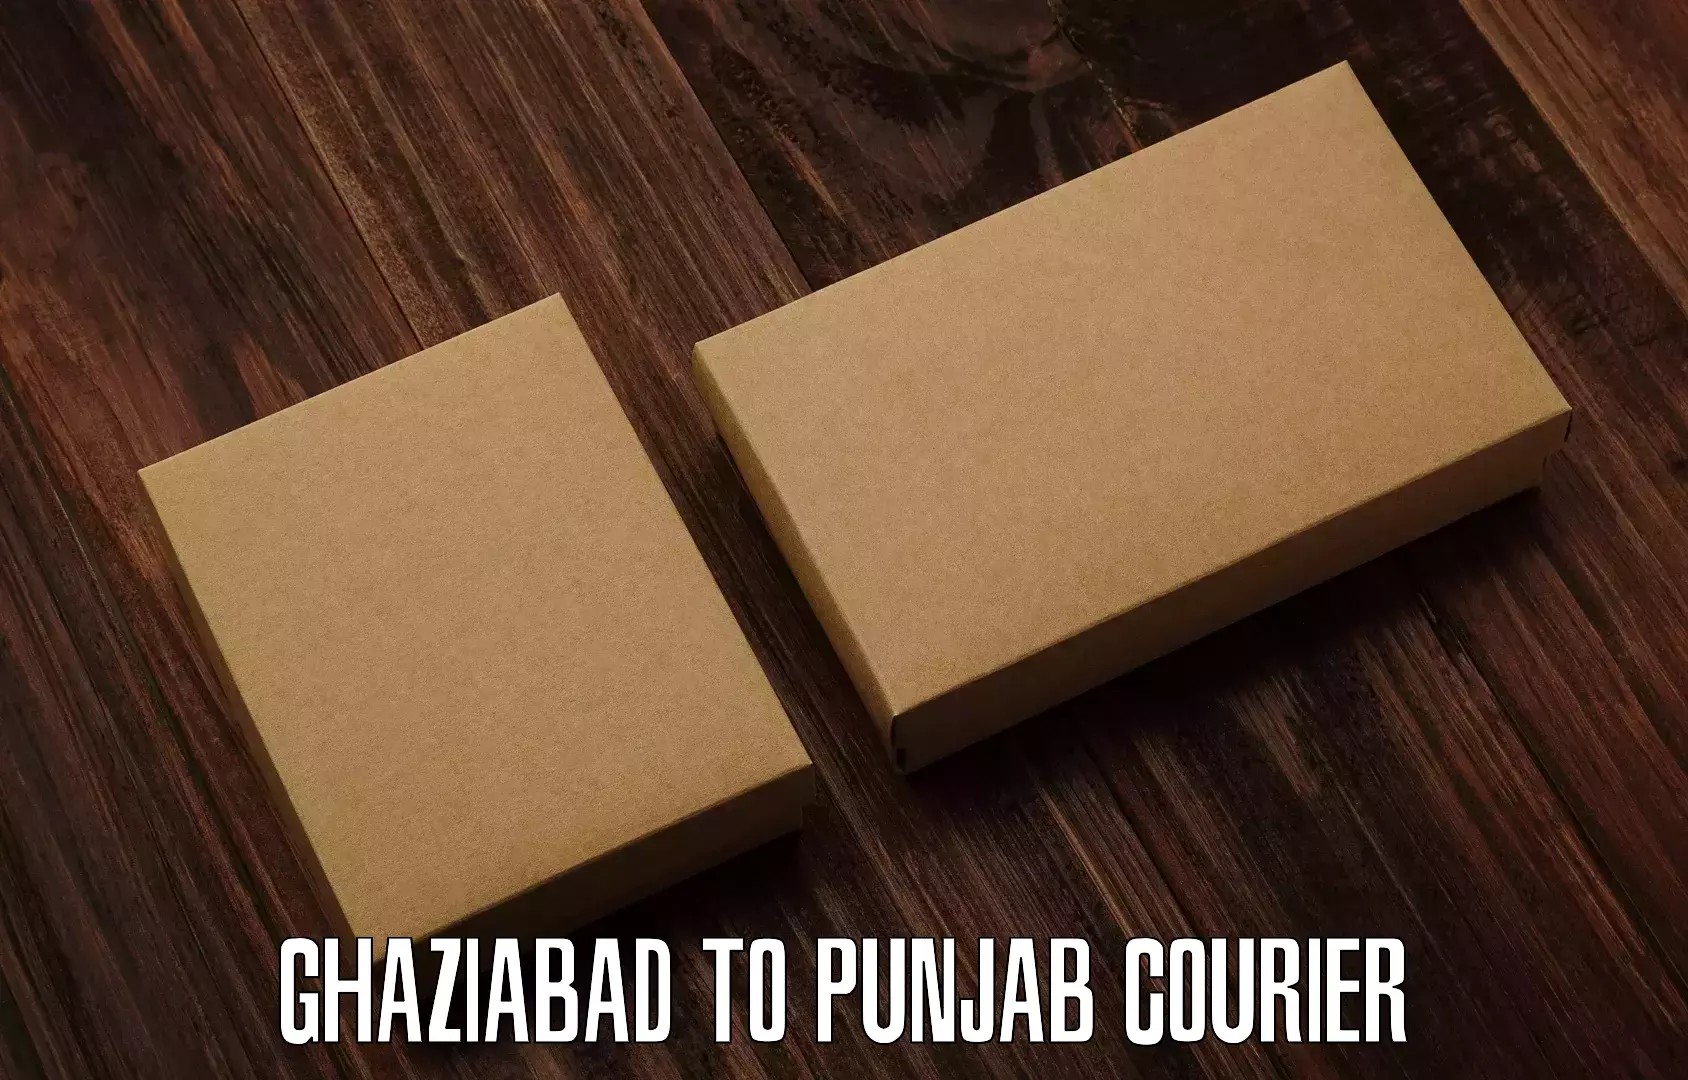 Courier service partnerships Ghaziabad to Punjab